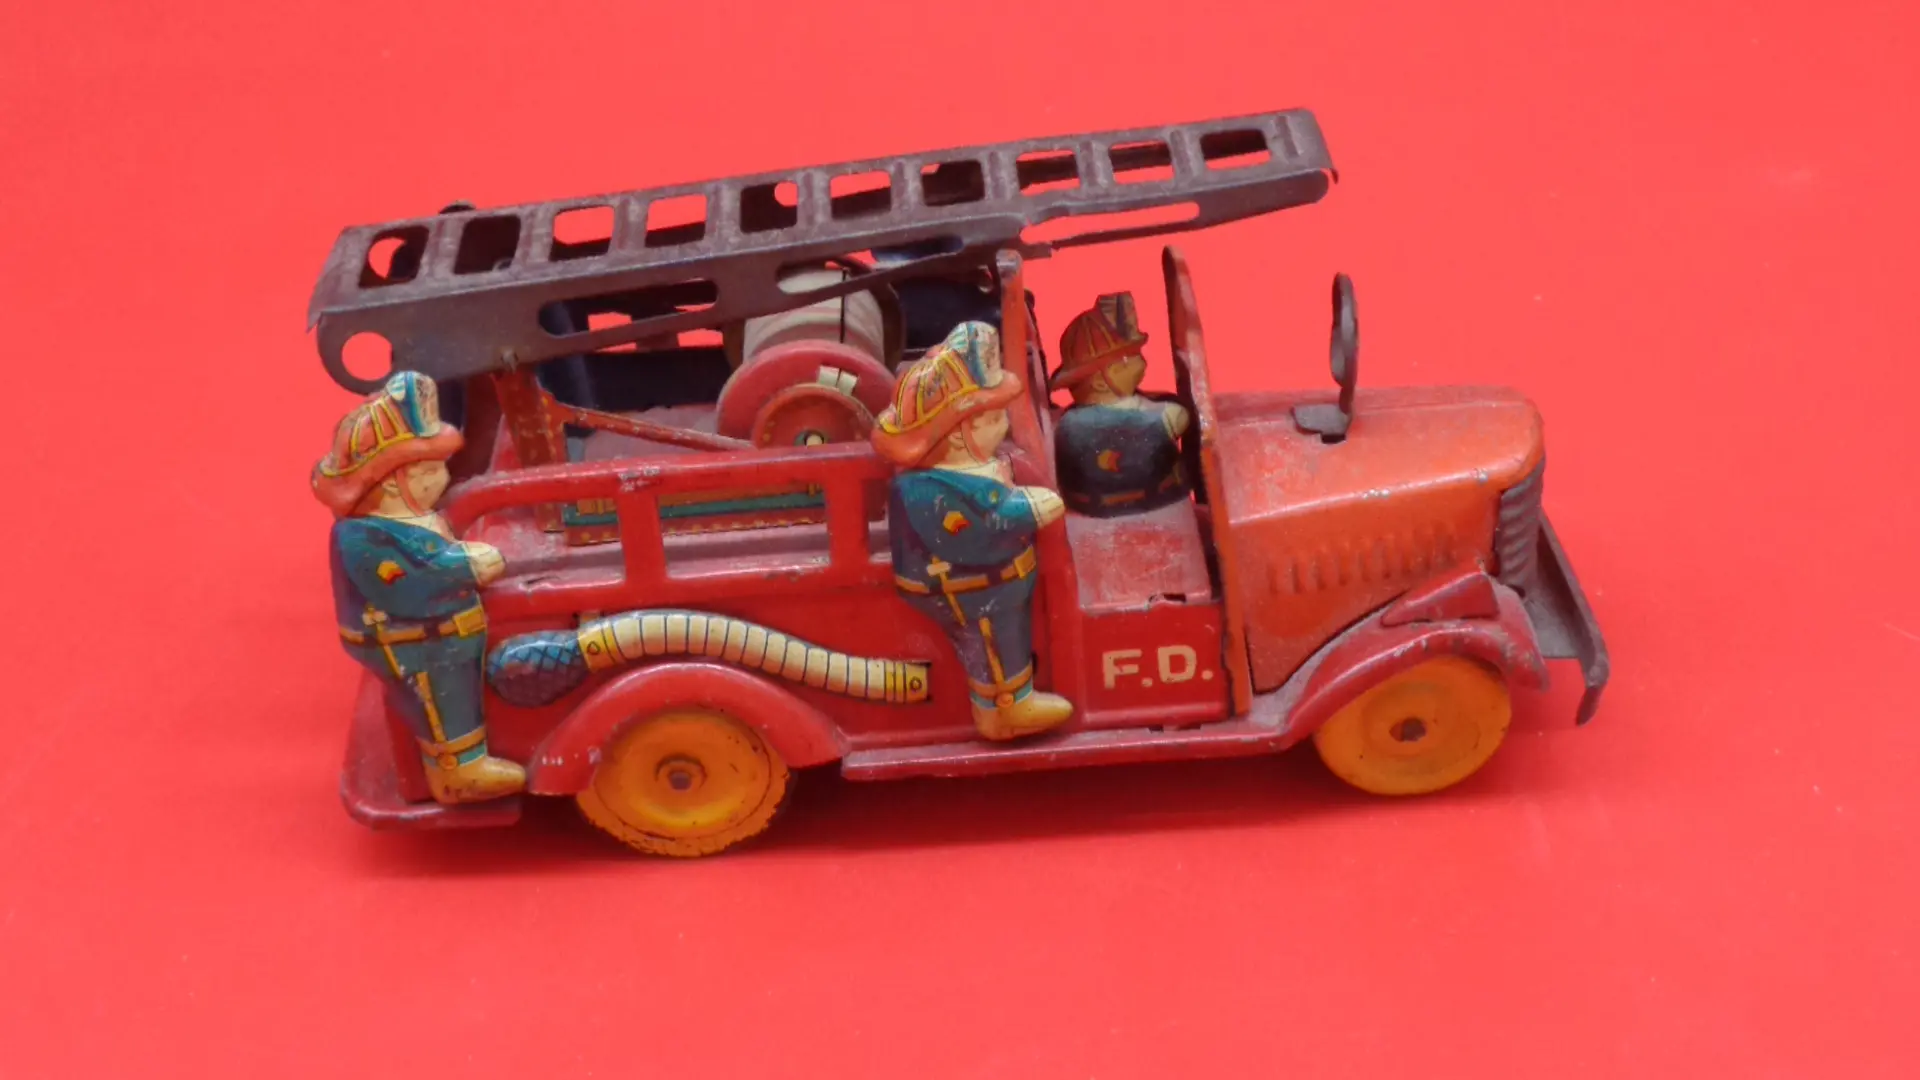 Small, vintage toy firetruck